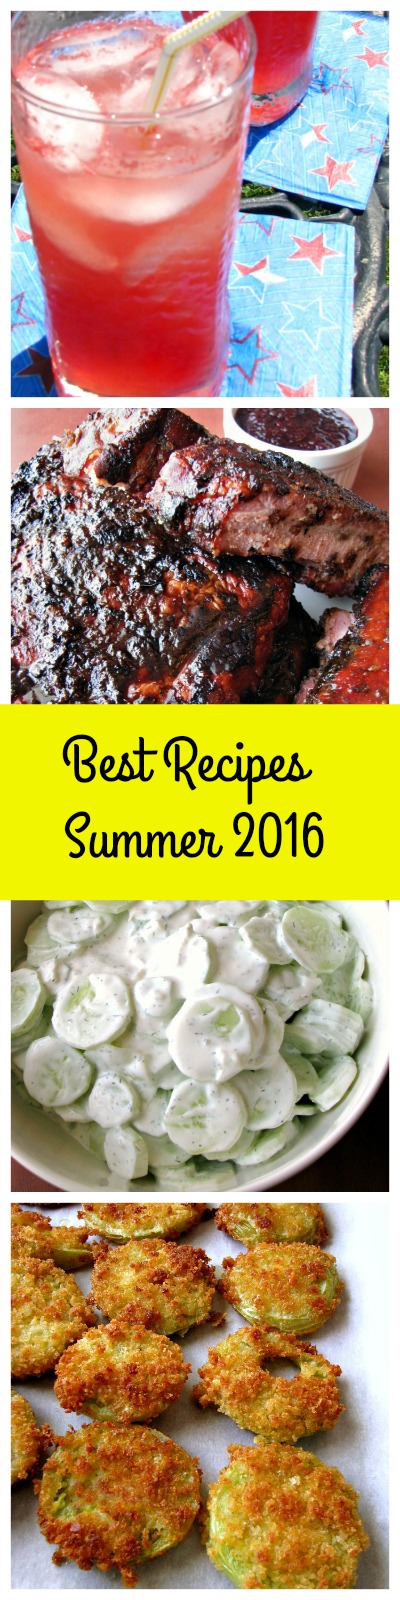 Best Recipes Summer 2016- Watermelon Punch, Grilled Cajun Blueberry BBQ Ribs, Creamy Cucumber Salad, Crispy Fried Green Tomatoes. 